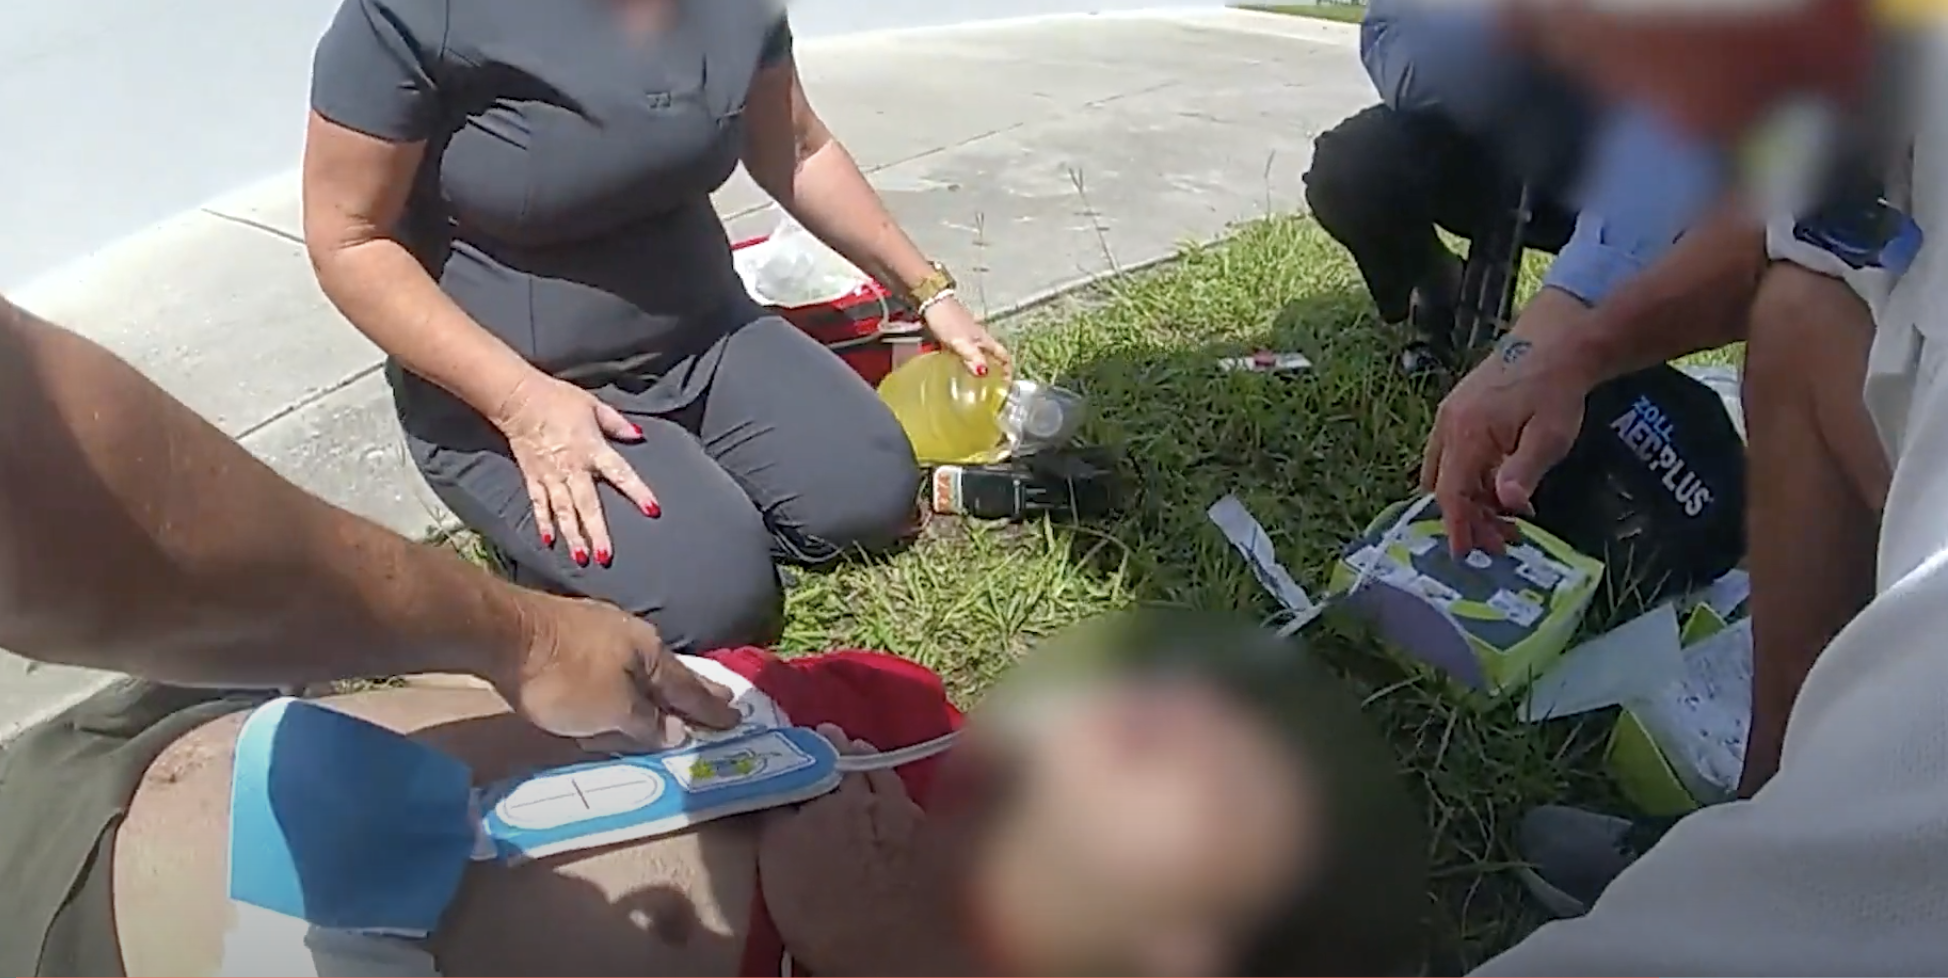 BODY CAM: Deputy uses AED and CPR to save student's life